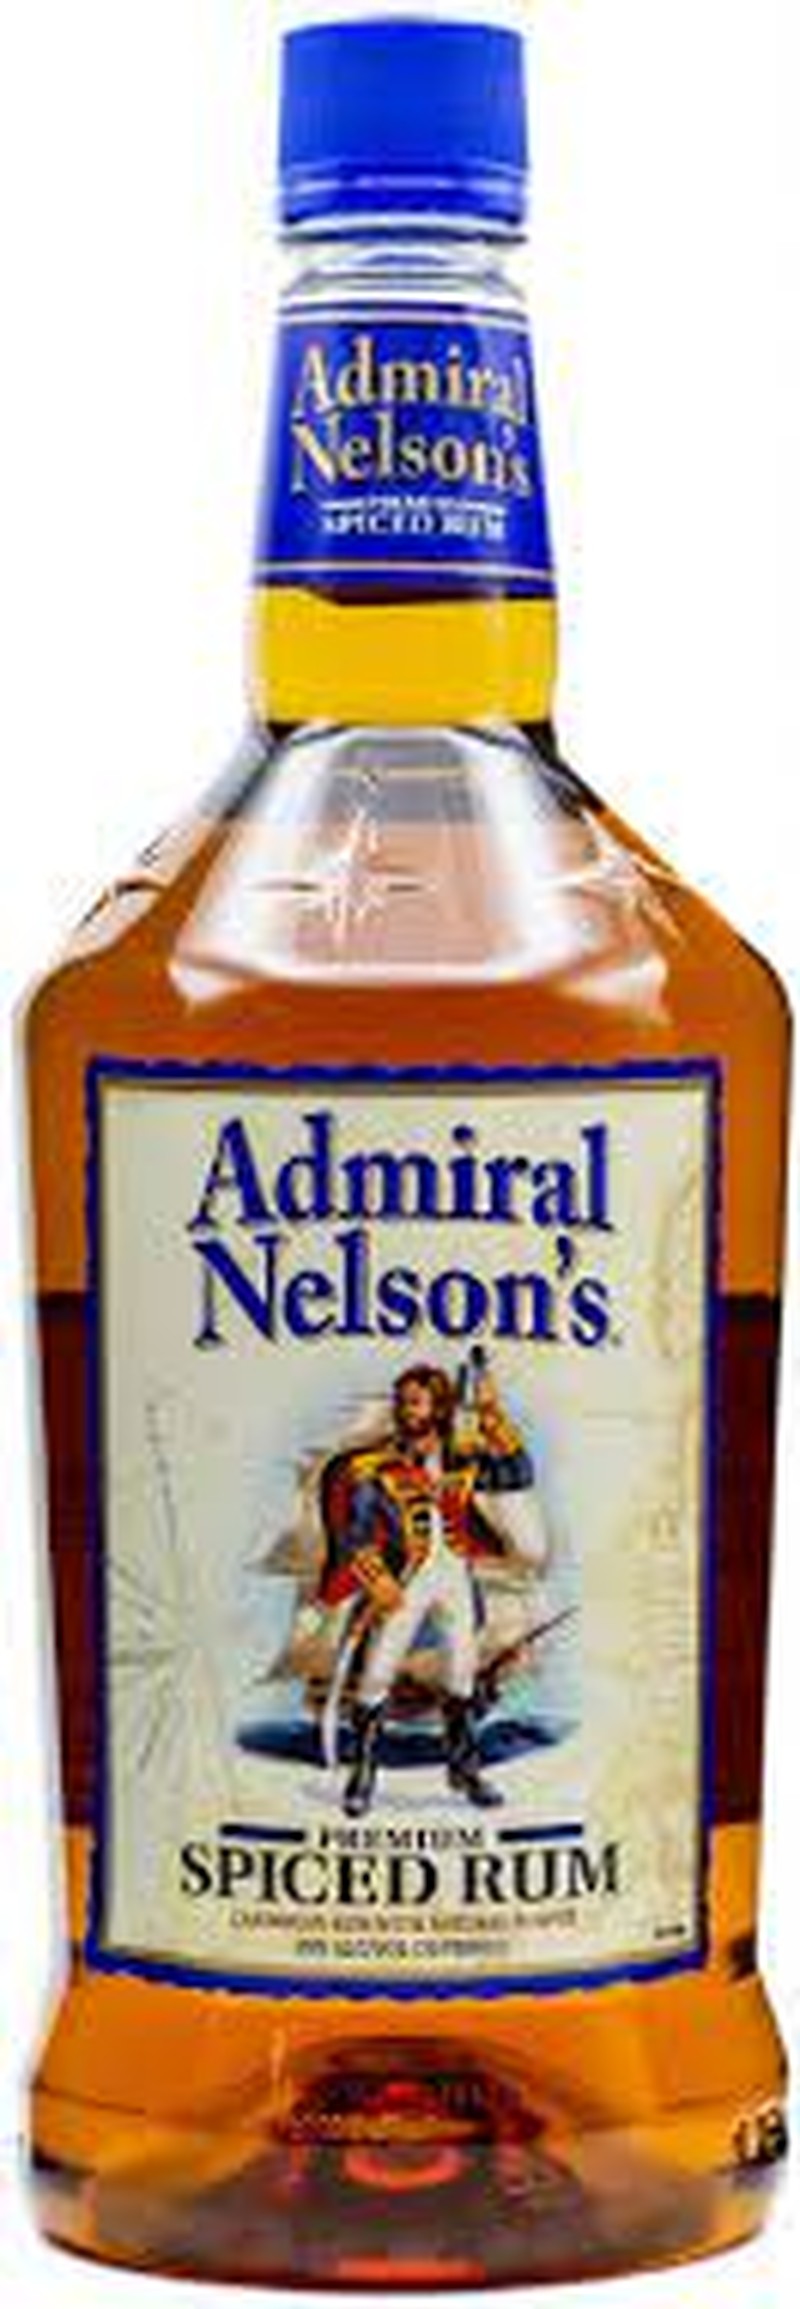 ADMIRAL NELSON'S SPICED RUM 1.75L